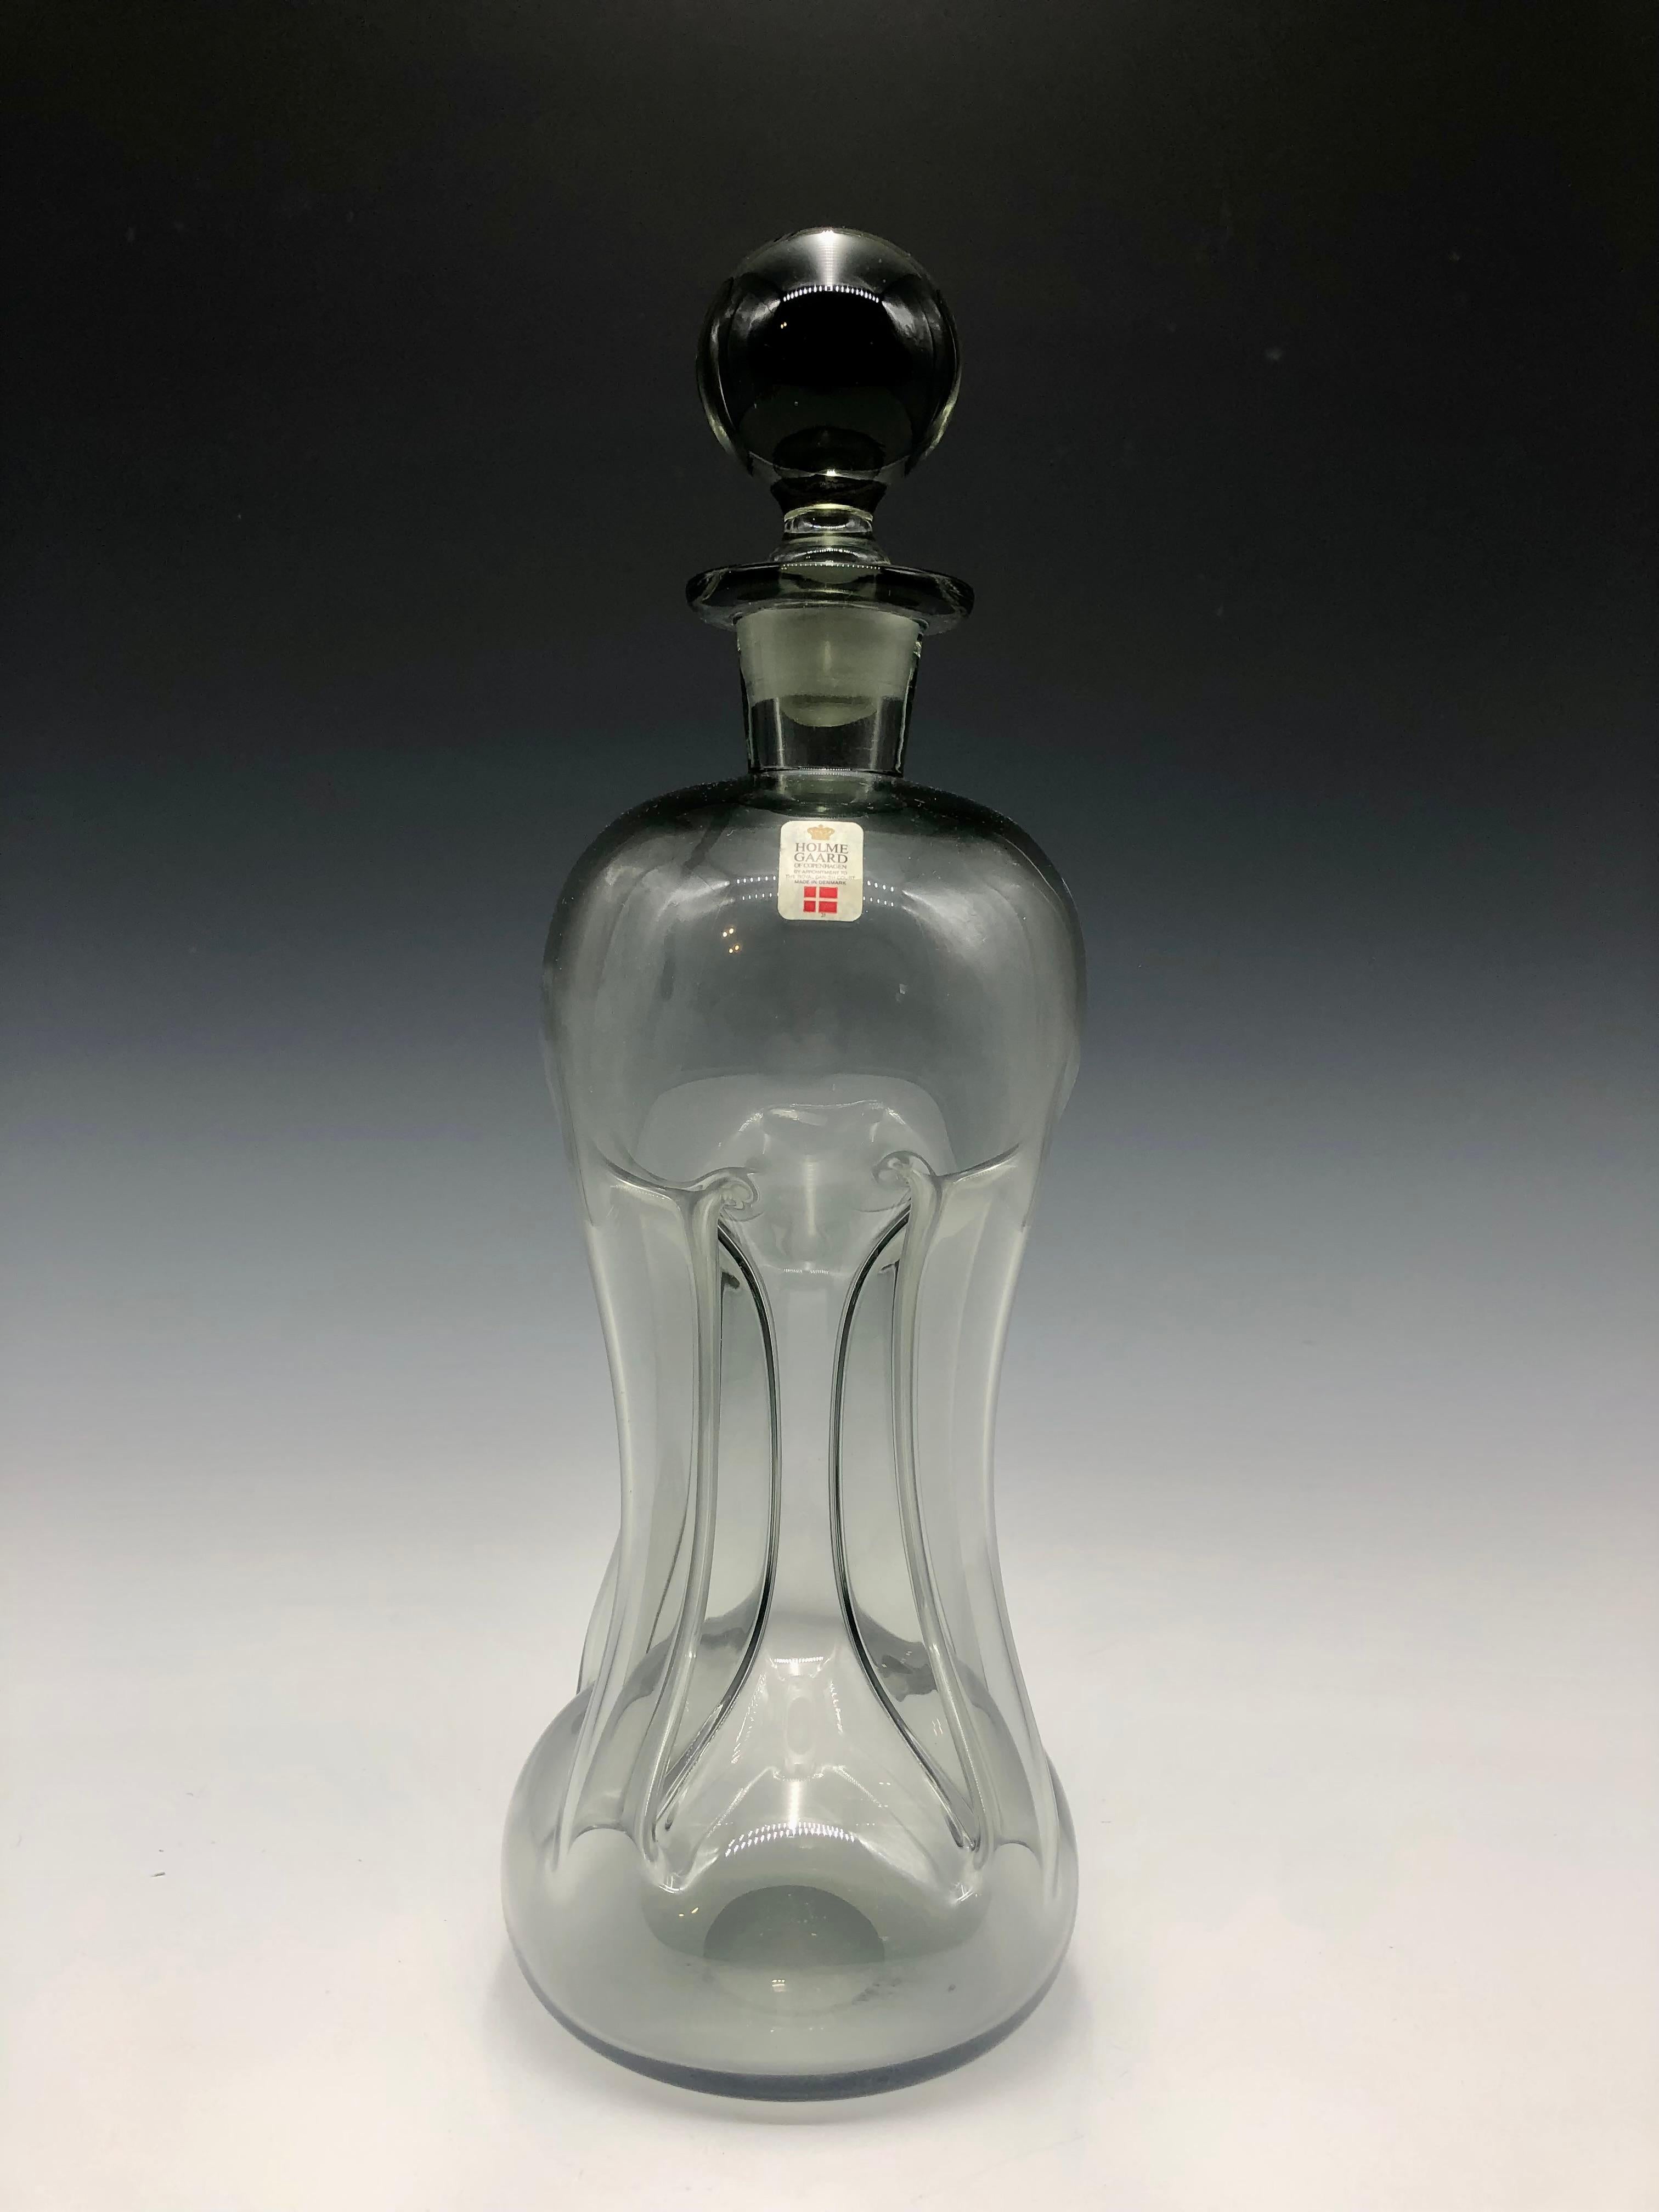 Elegant vintage mid-century Holmegaard Kluk Kluk smoke color glass decanter with stopper and original manufacturer's label by Jacob E. Bang, a true gem from 1960s Denmark. Meticulously crafted and preserved, this mouth-blown glass piece embodies the